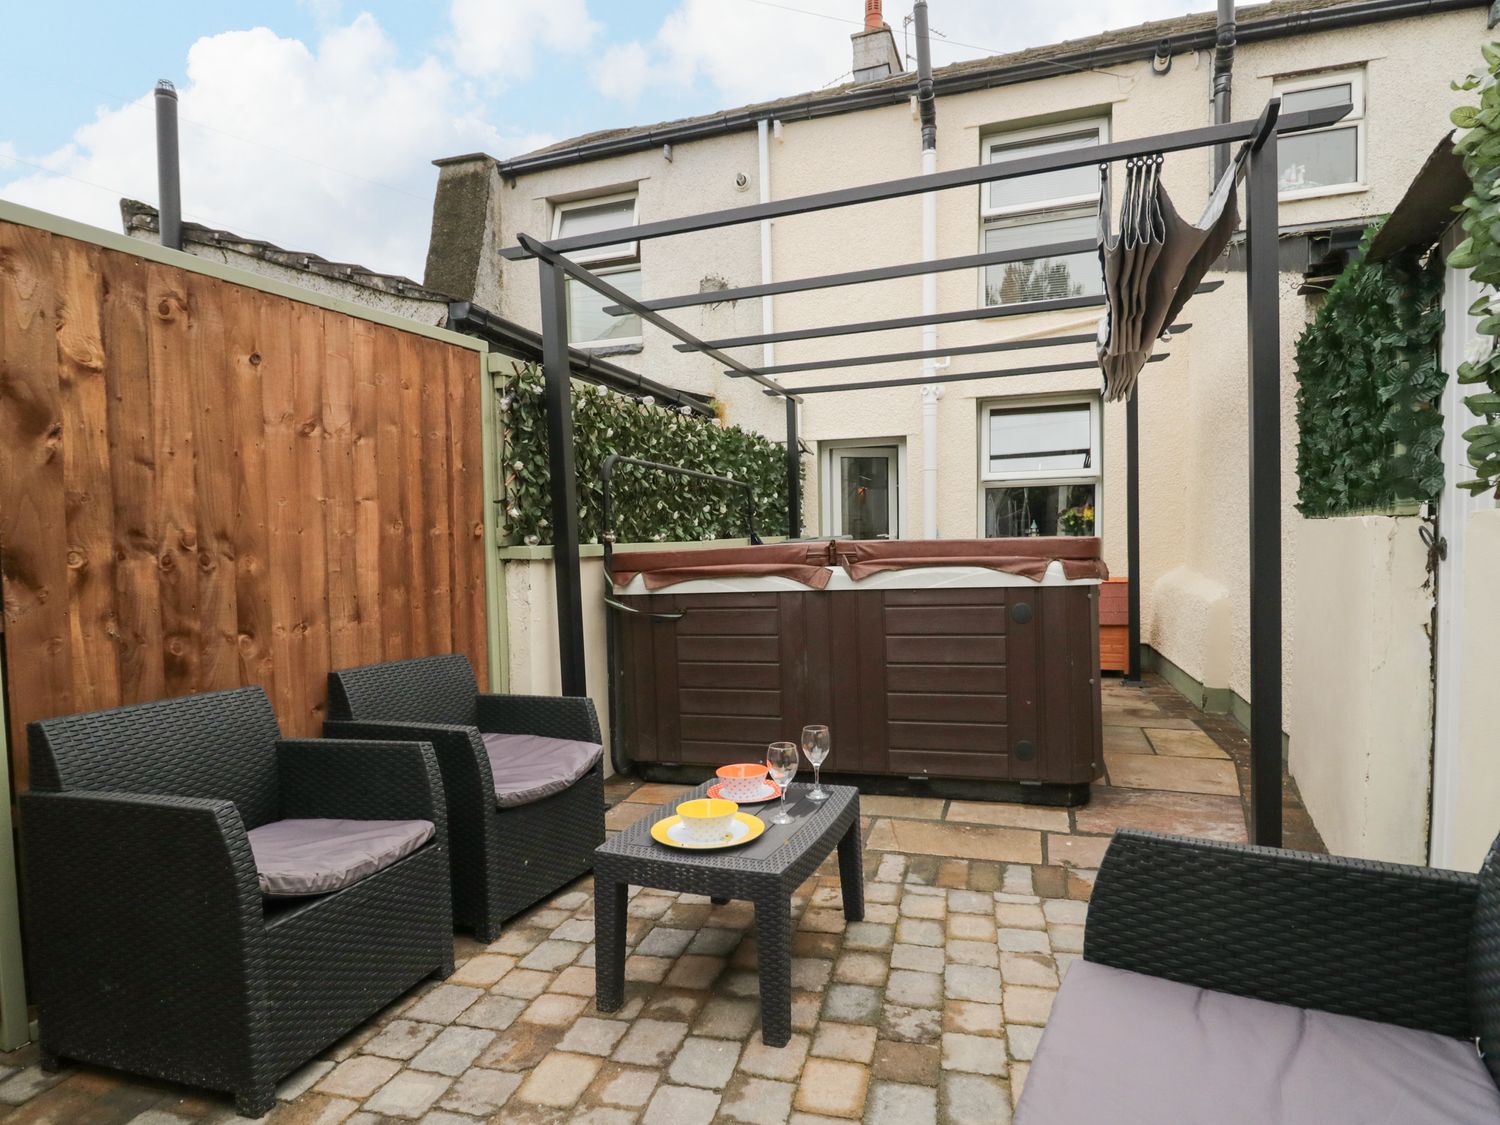 Bay Cottage No 7 in Morecambe, Lancashire. Two-bedroom home near amenities and beach. Hot tub. Pets.